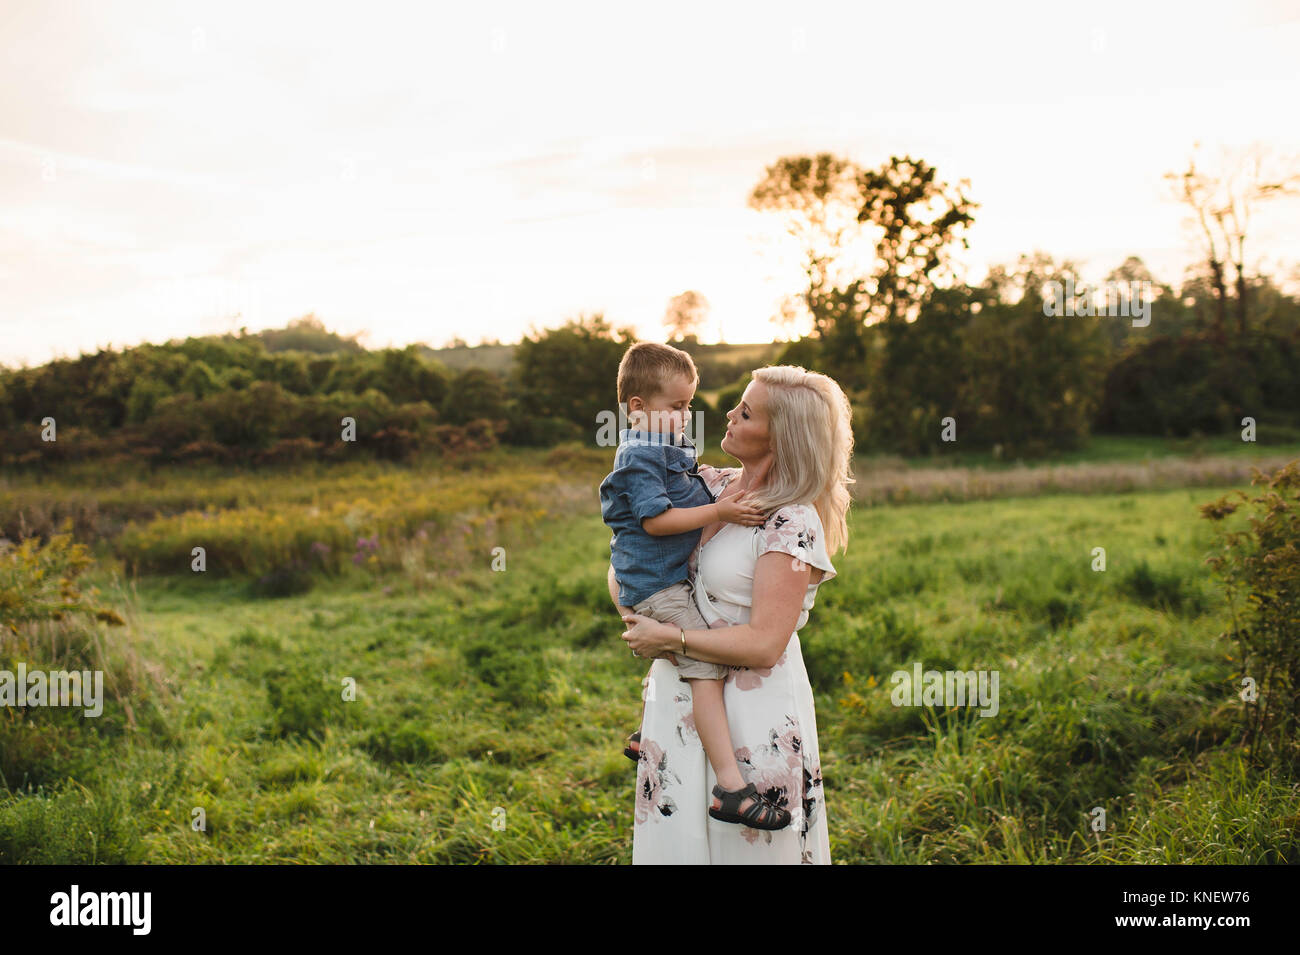 Mother holding son in rural area Stock Photo